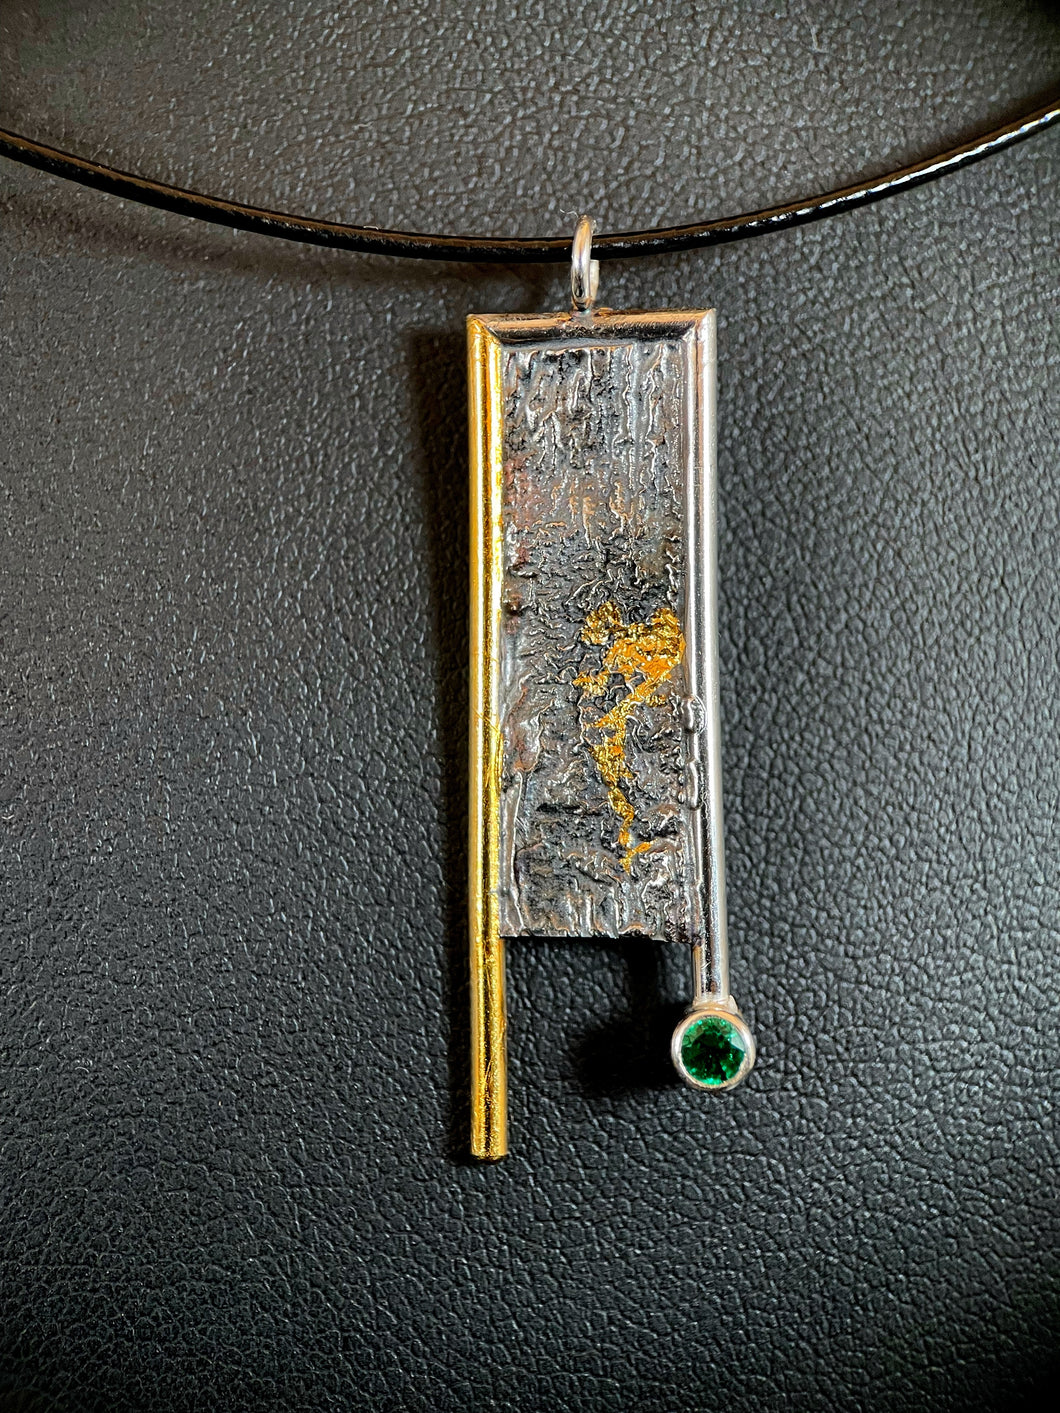 A rectangular necklace hanging vertically. The left side is bordered in gold, which hangs down below the body of the necklace. The top and right side are framed in silver, with the side hanging below the body but above the gold side. The silver wire border ends in a lab grown emerald. The body of the necklace is reticulated silver, with an organic, terrain-like texture. There is a blotch of gold in the mid-right side, which trails downward in the recessed portion of the silver.